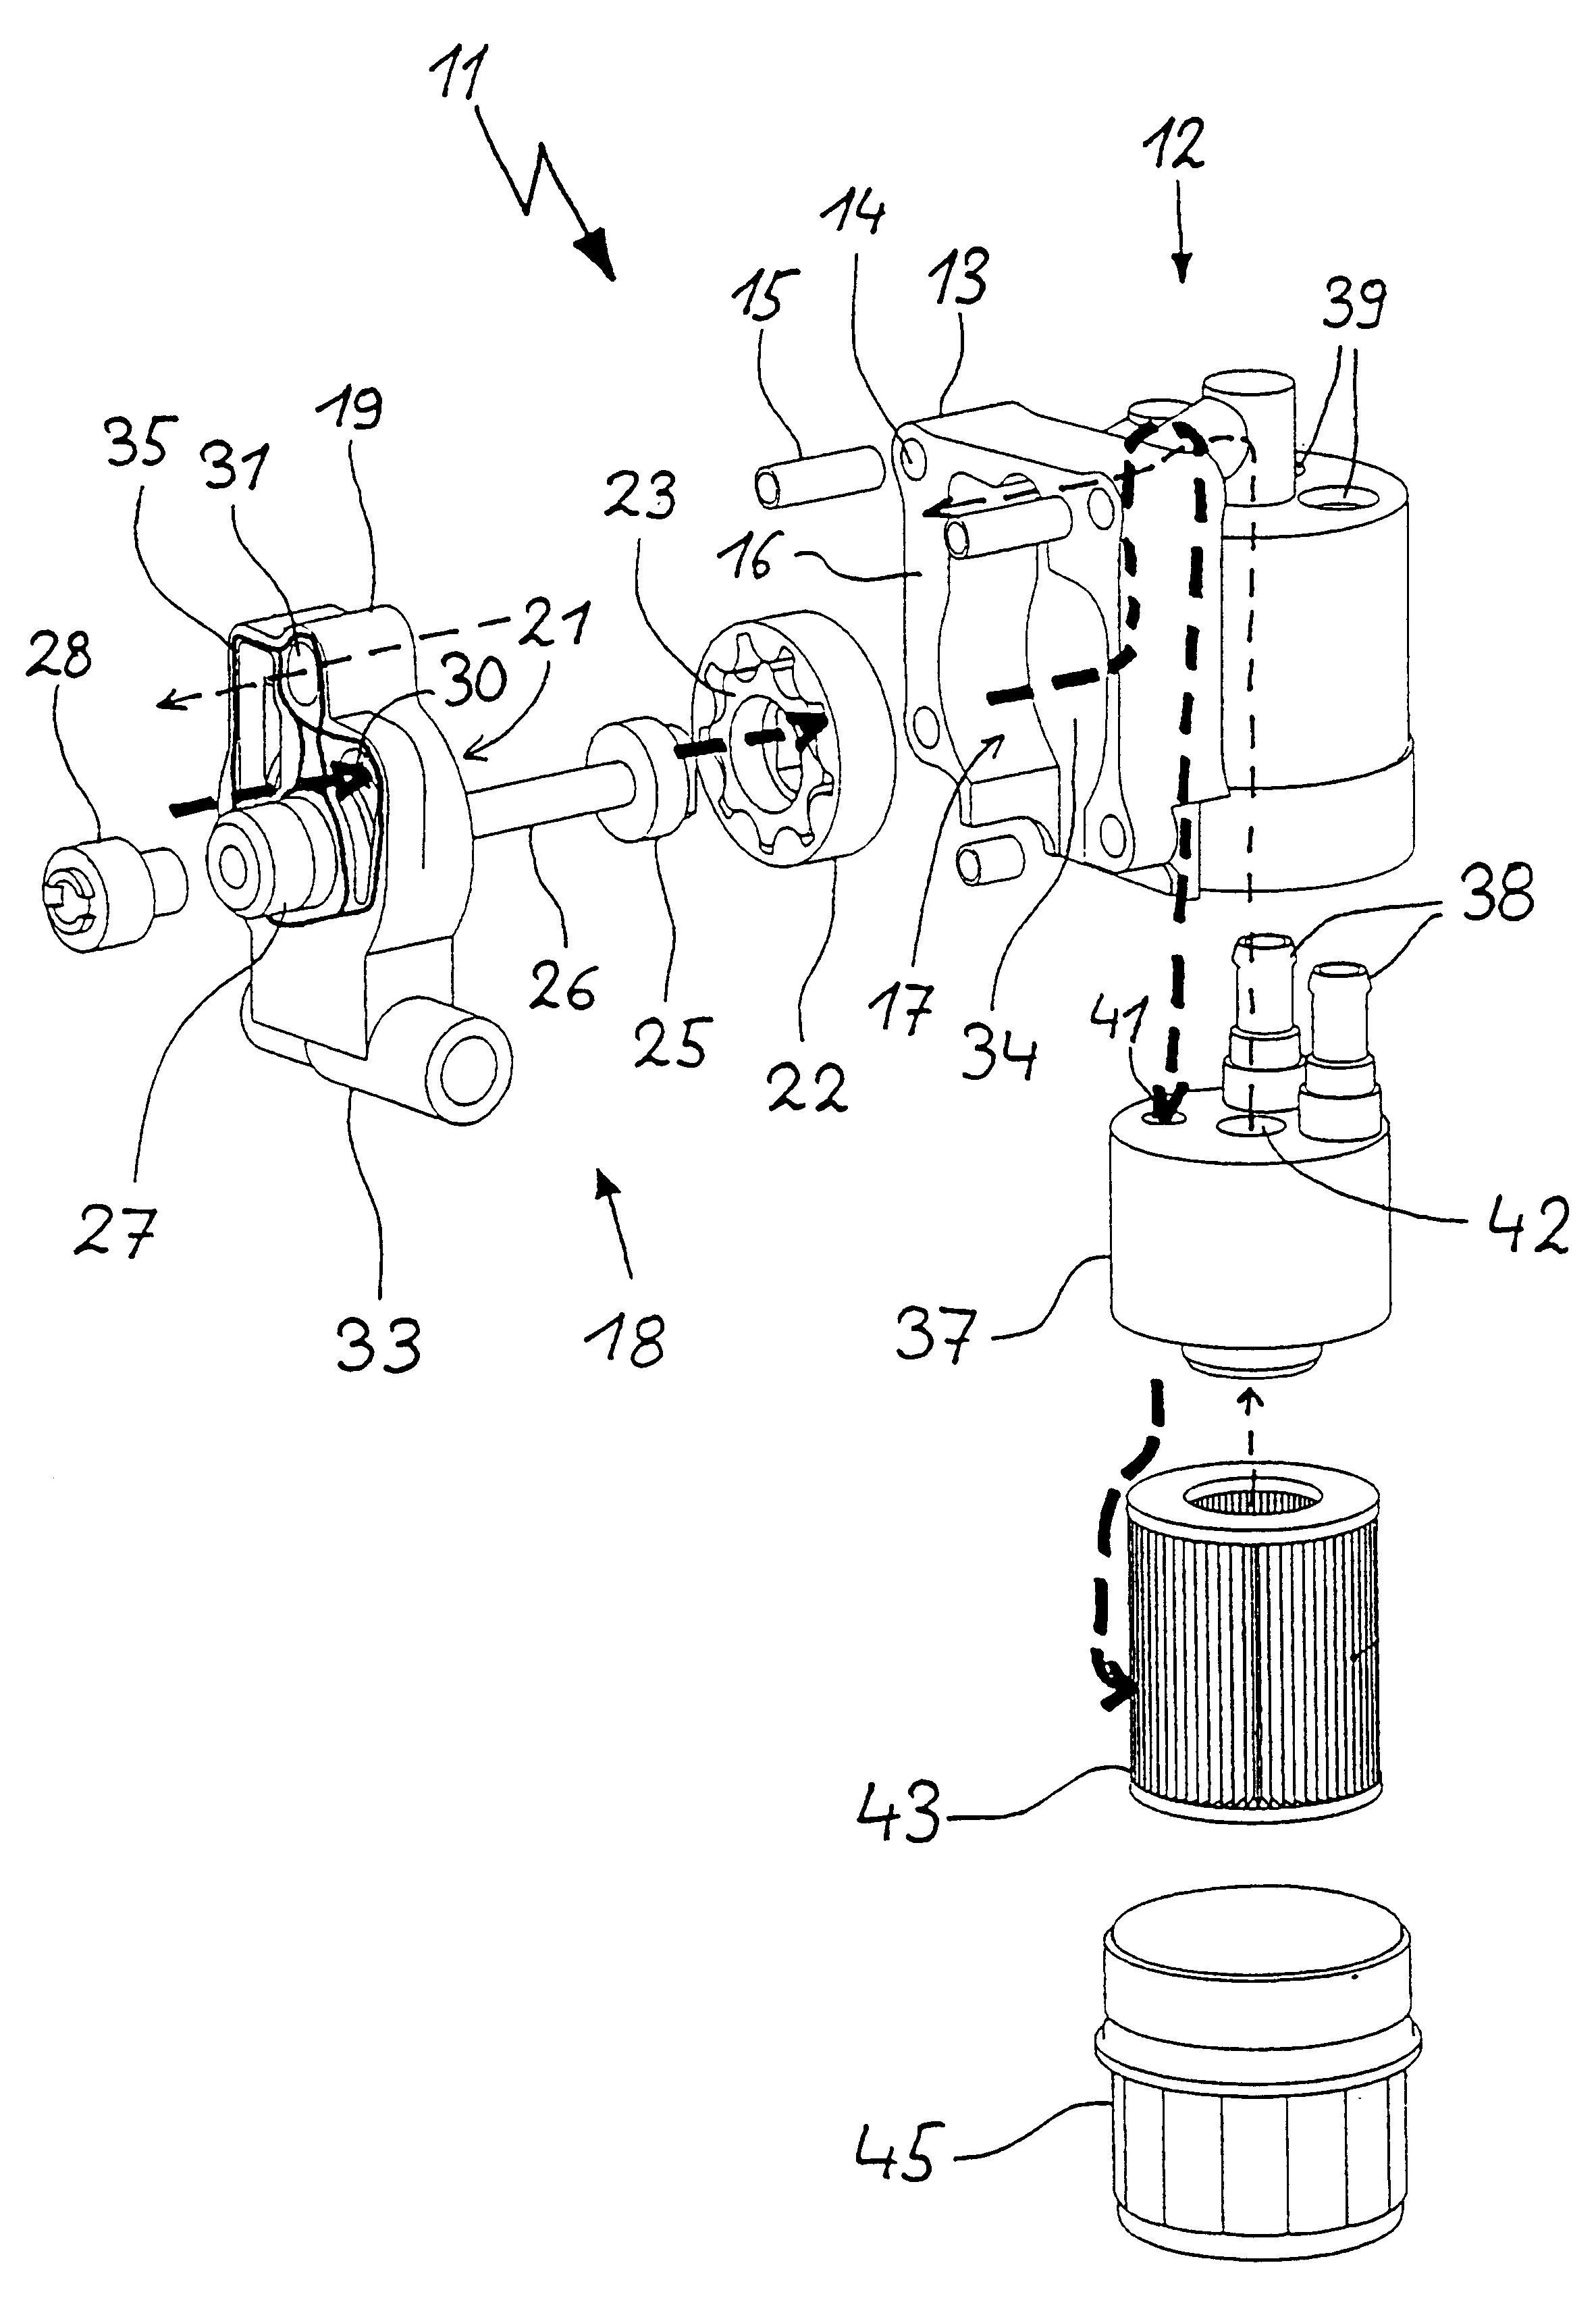 Oil pump module with filter in particular for internal combustion engine lubricating oil